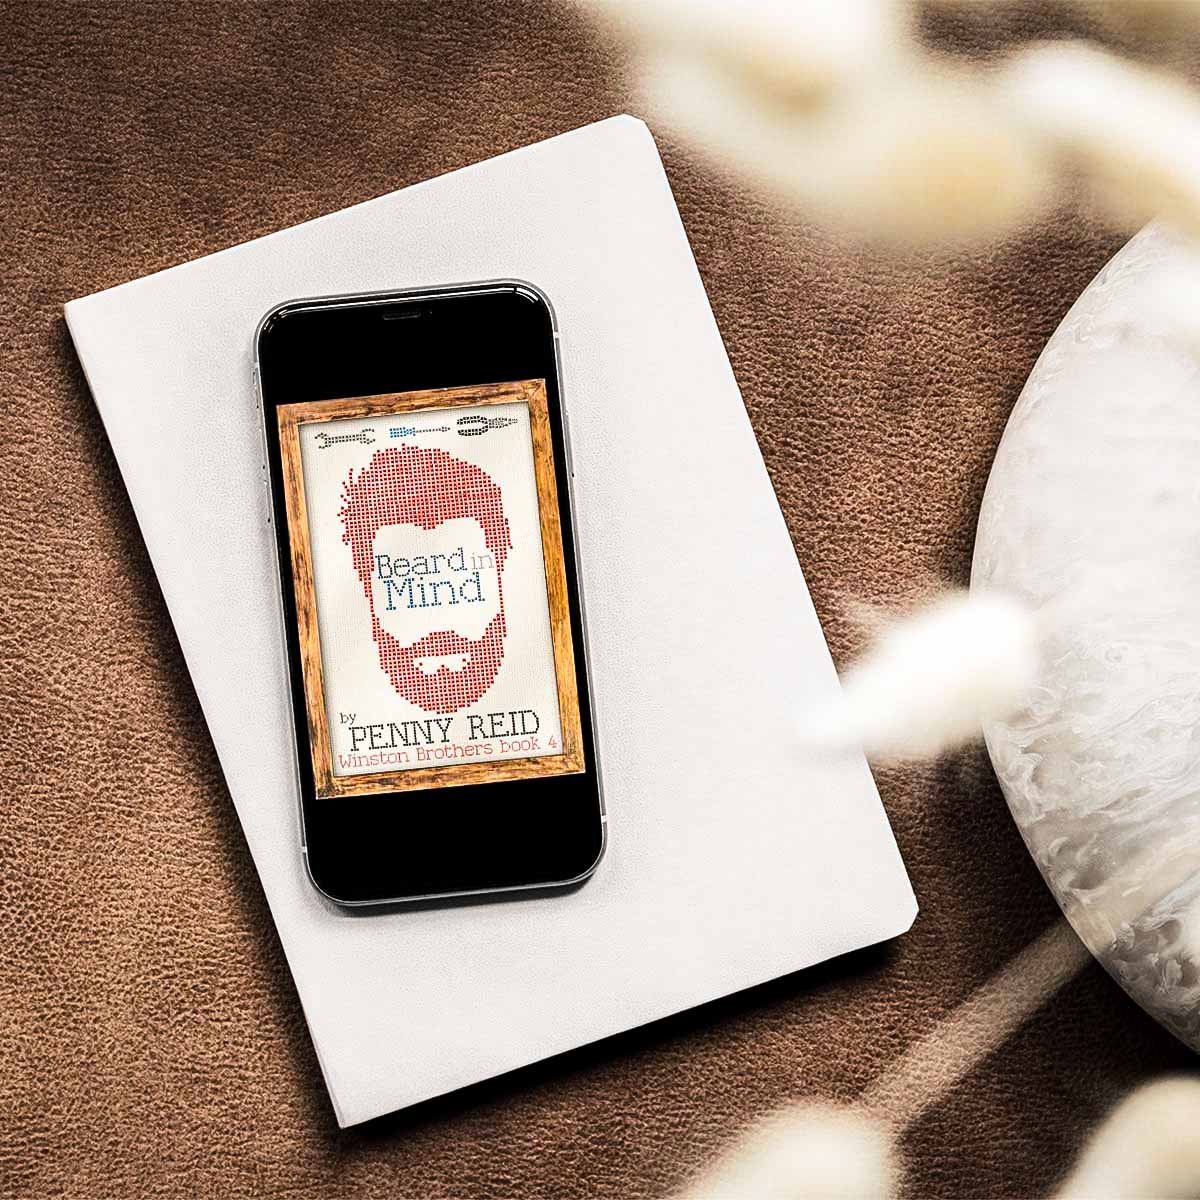 Beard in Mind by Penny Reid has smart writing (like wicked smart), lovable quirky characters, emotional yet heartfelt storylines, and layers upon layers of development.